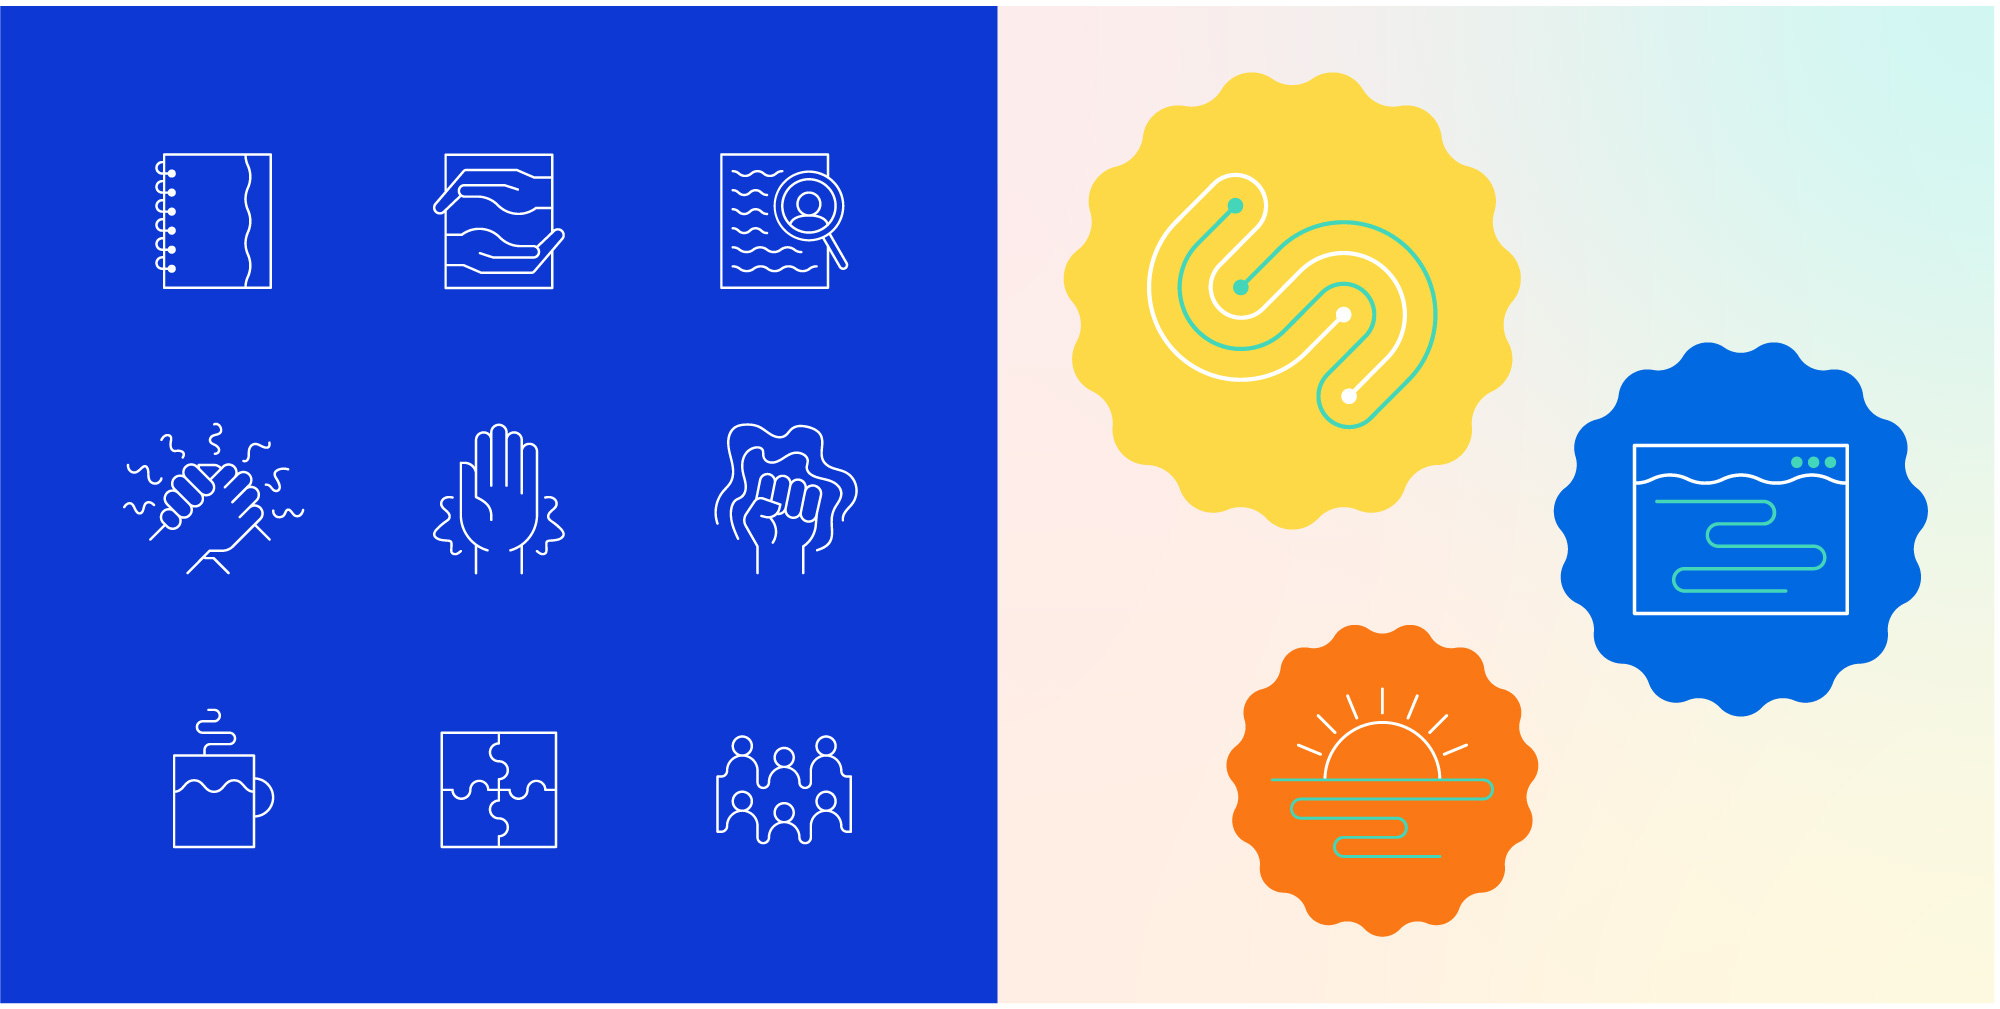 New Logo and Identity for Girls Who Code by Hyperakt